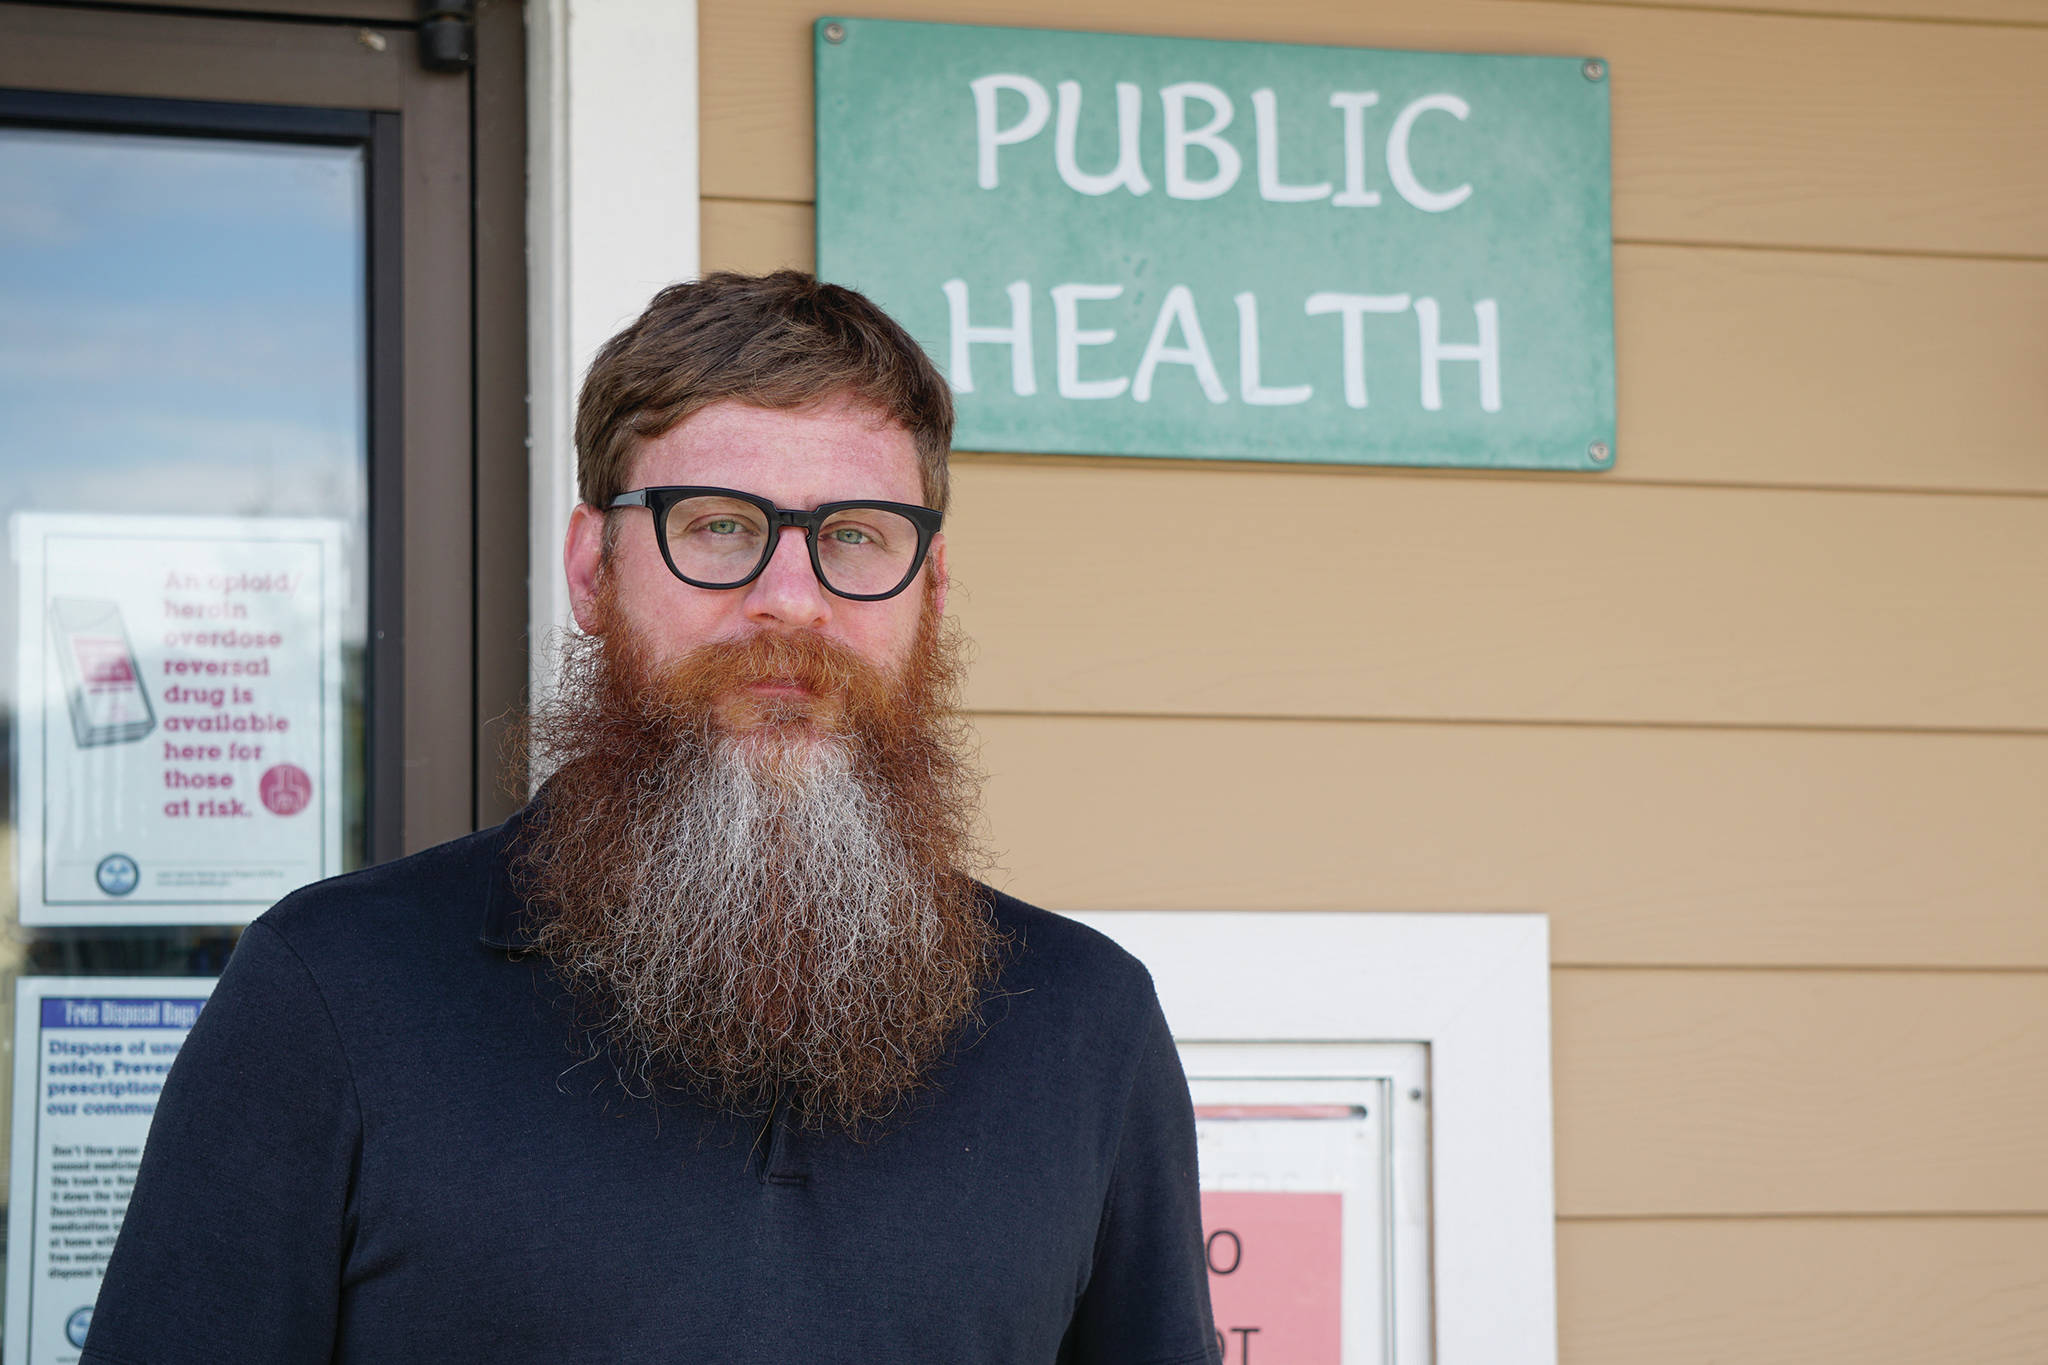 Public Health nurse Lorne Carroll poses on May 29, 2020, outside the Alaska Department of Public Health offices on Bunnell Avenue in Homer, Alaska. (Photo by Michael Armstrong/Homer News)